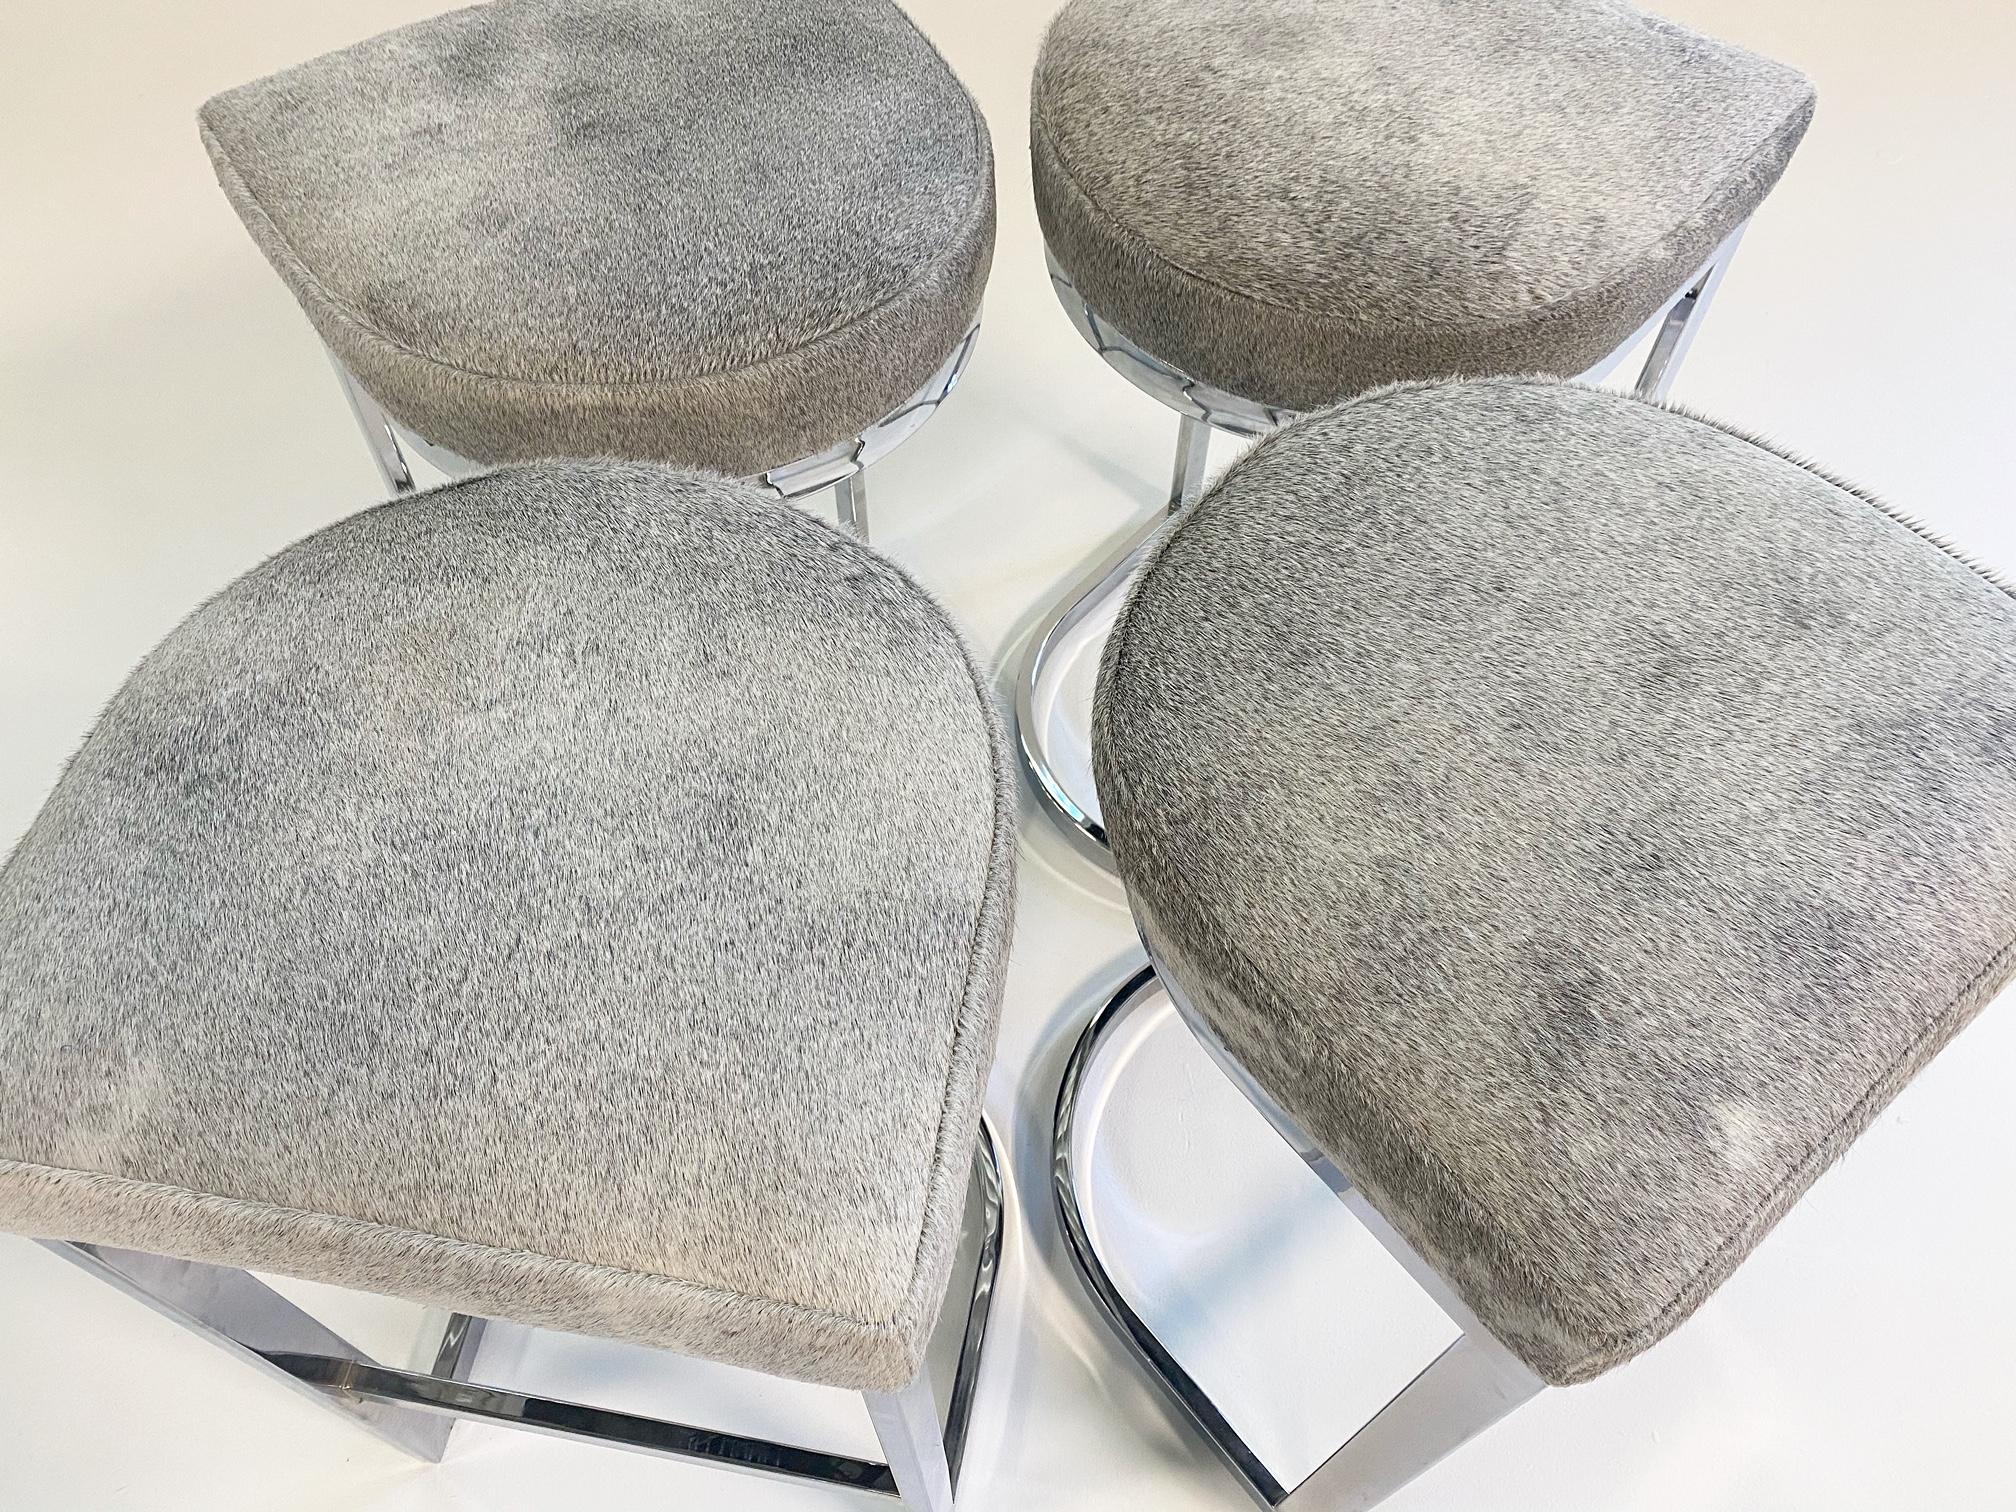 In a room, the eye is always drawn to metal. The sheen, the shine, the reflections. What better way to add a bit of metal to a room than with a set of these chrome-plated steel bar stools. Each chair underwent our signature restoration. Our master